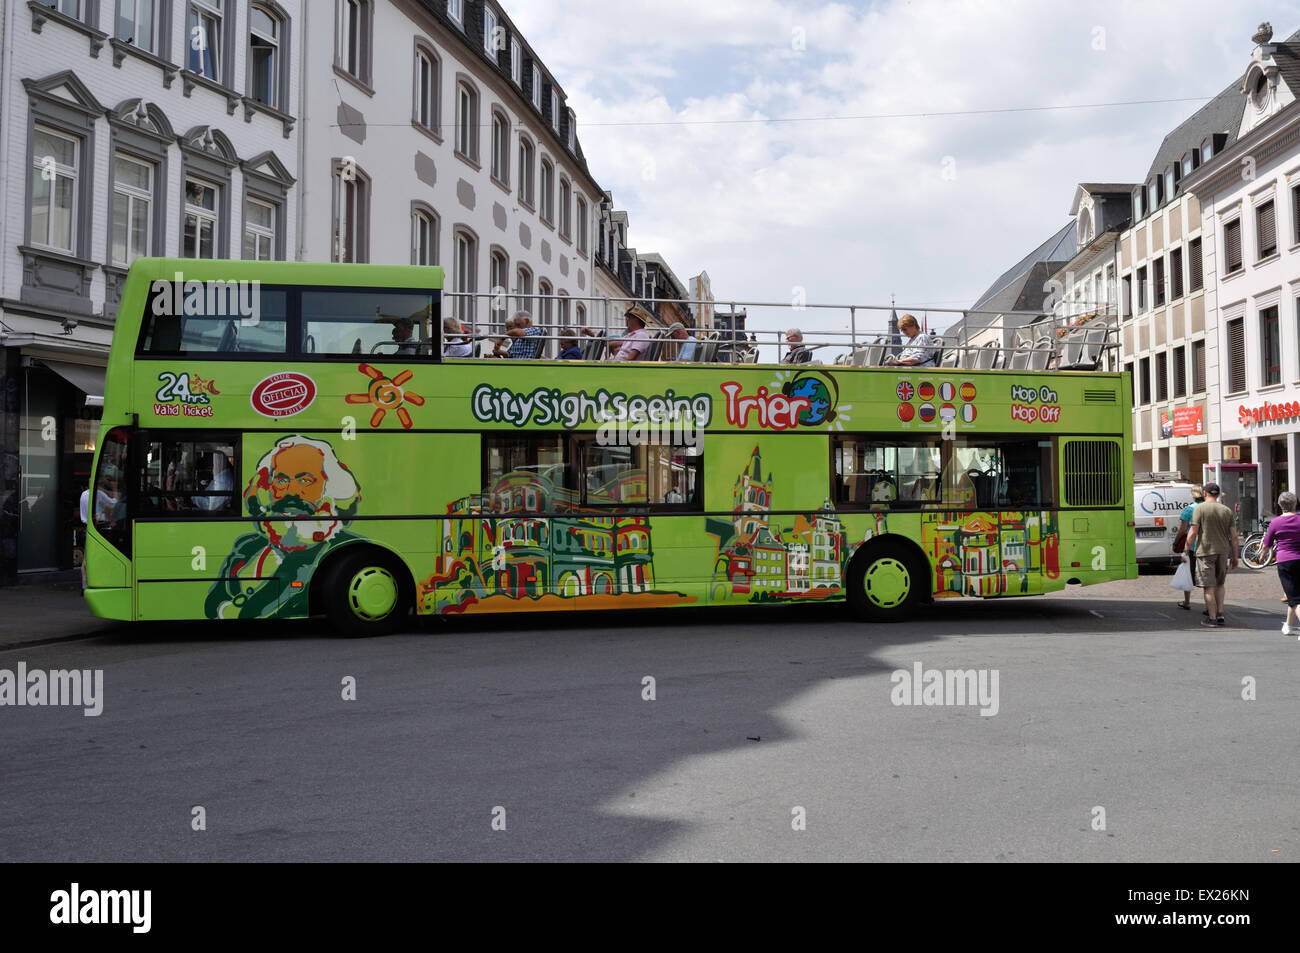 City Sightseeing bus in Trier, Germany. Luxembourg registration SL 3240. Volvo/East Lancs Vyking. Stock Photo